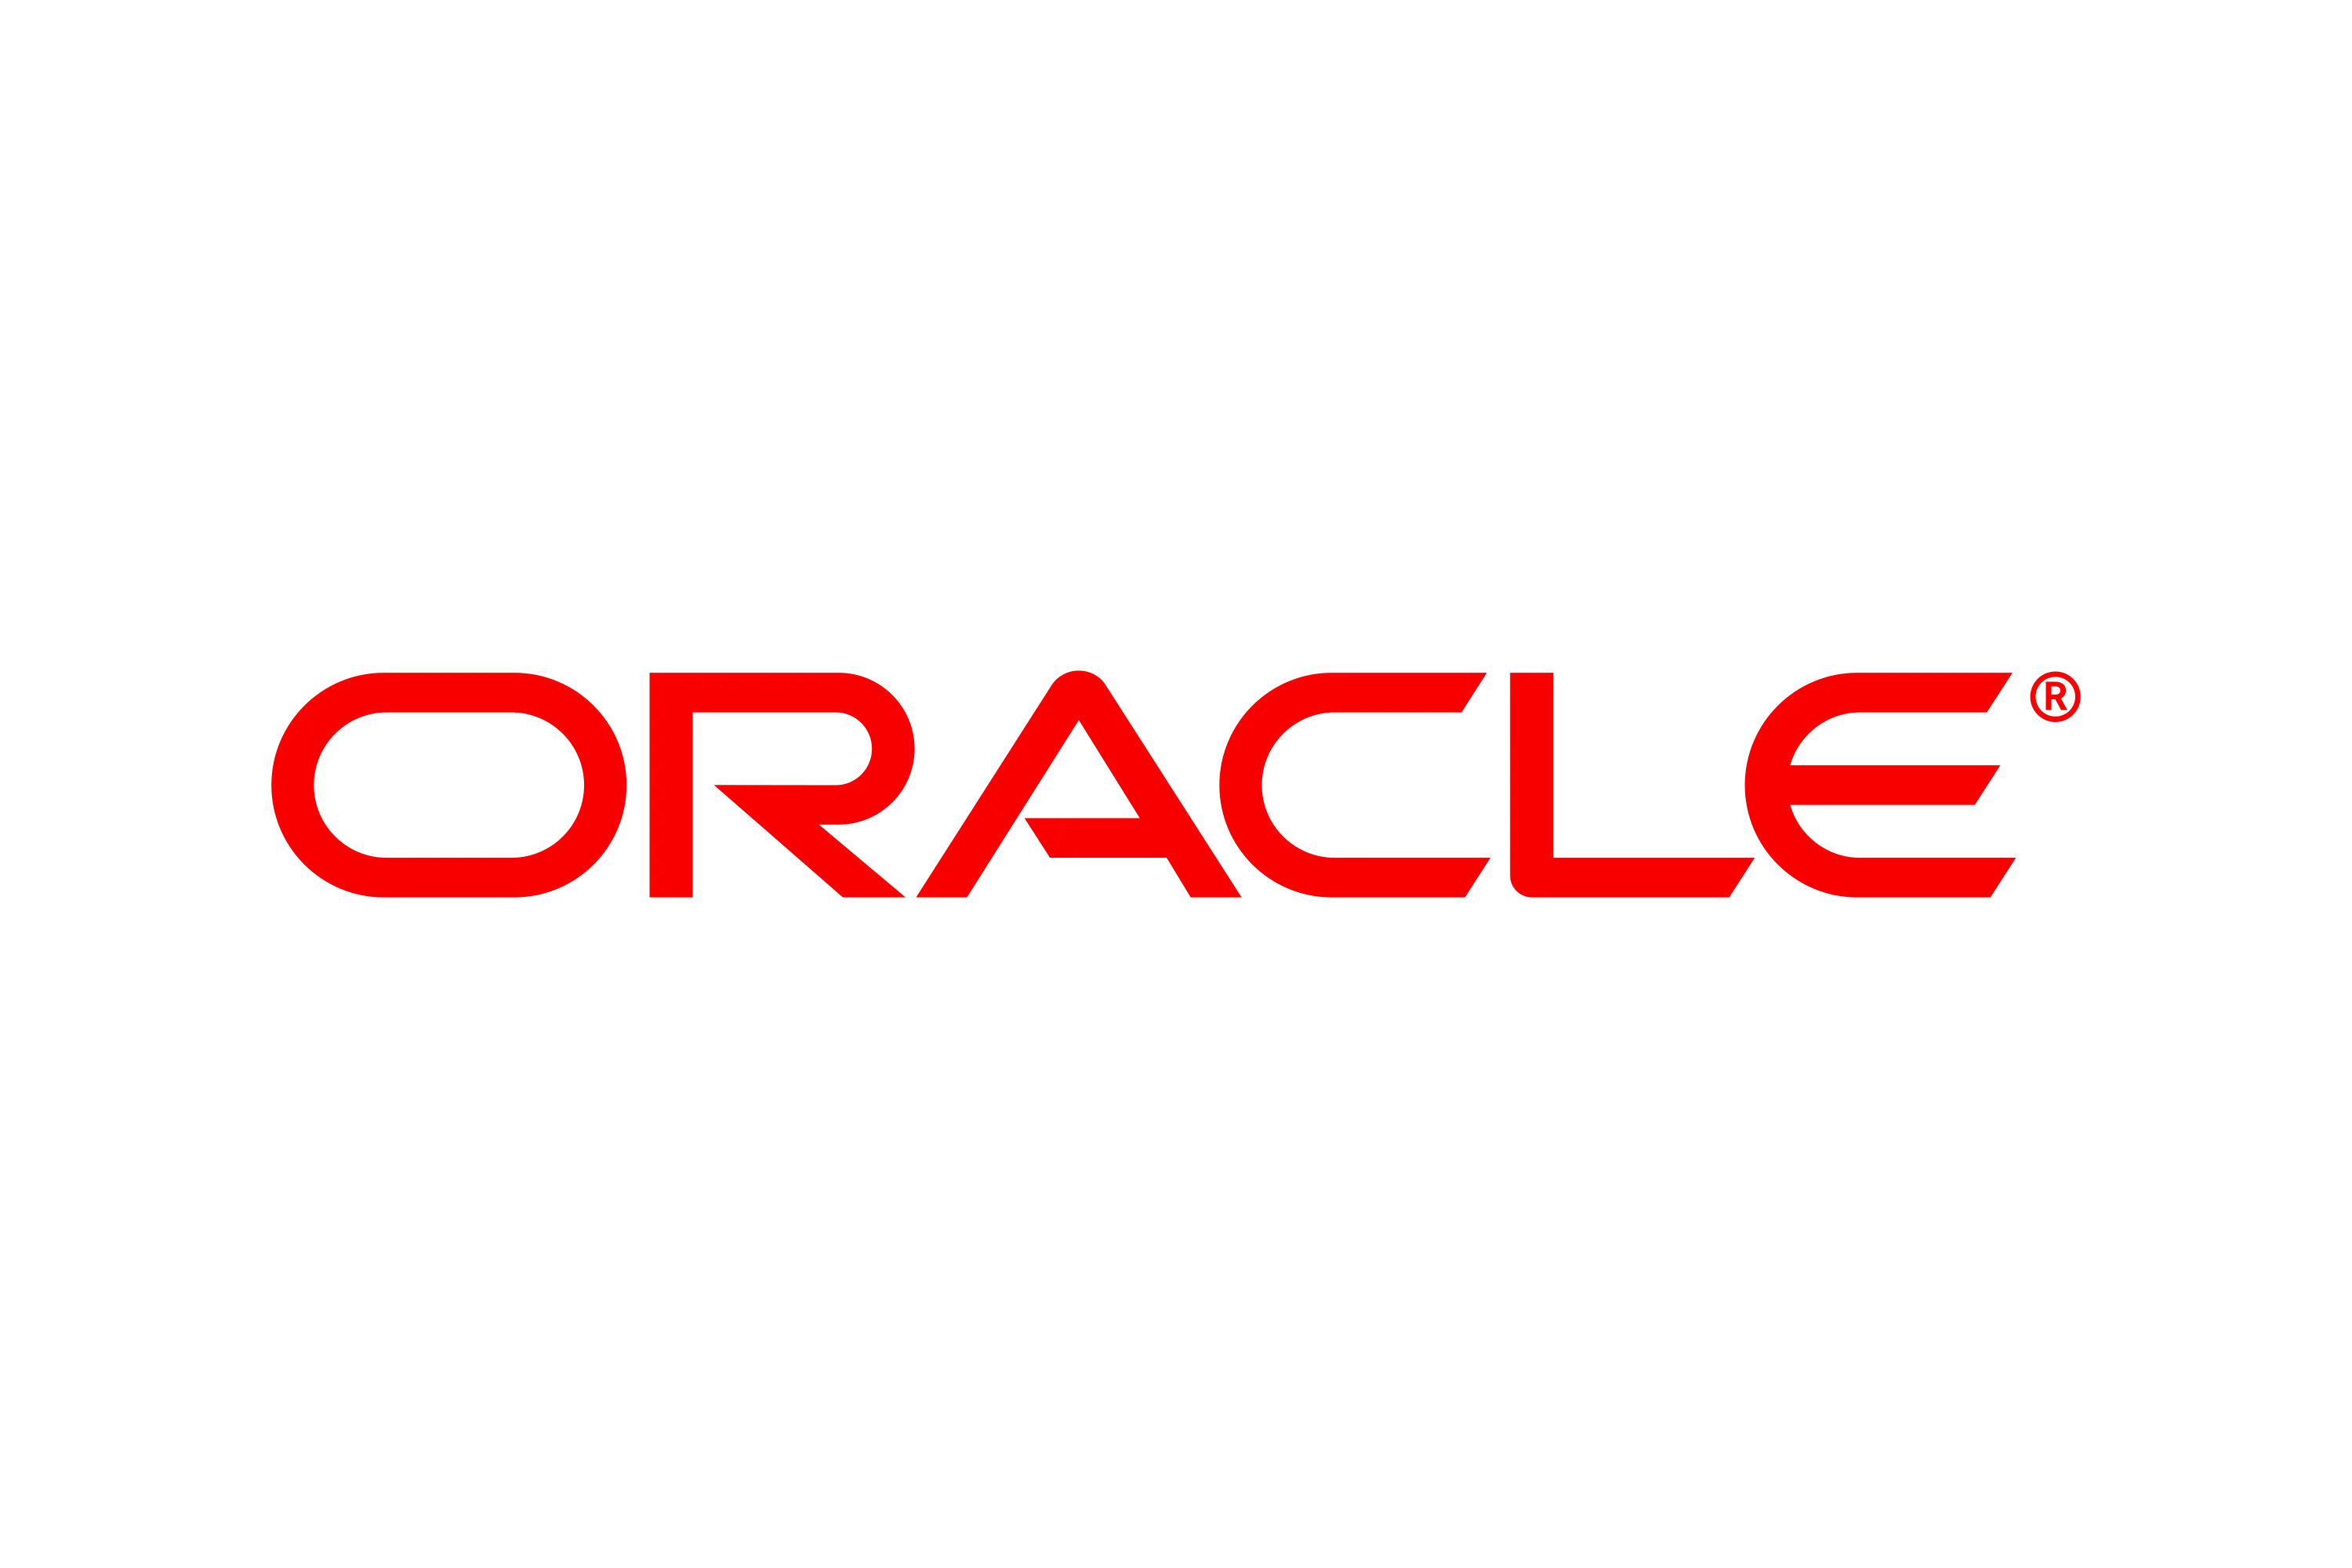 Install Oracle Linux on Crunchbits dedicated servers!